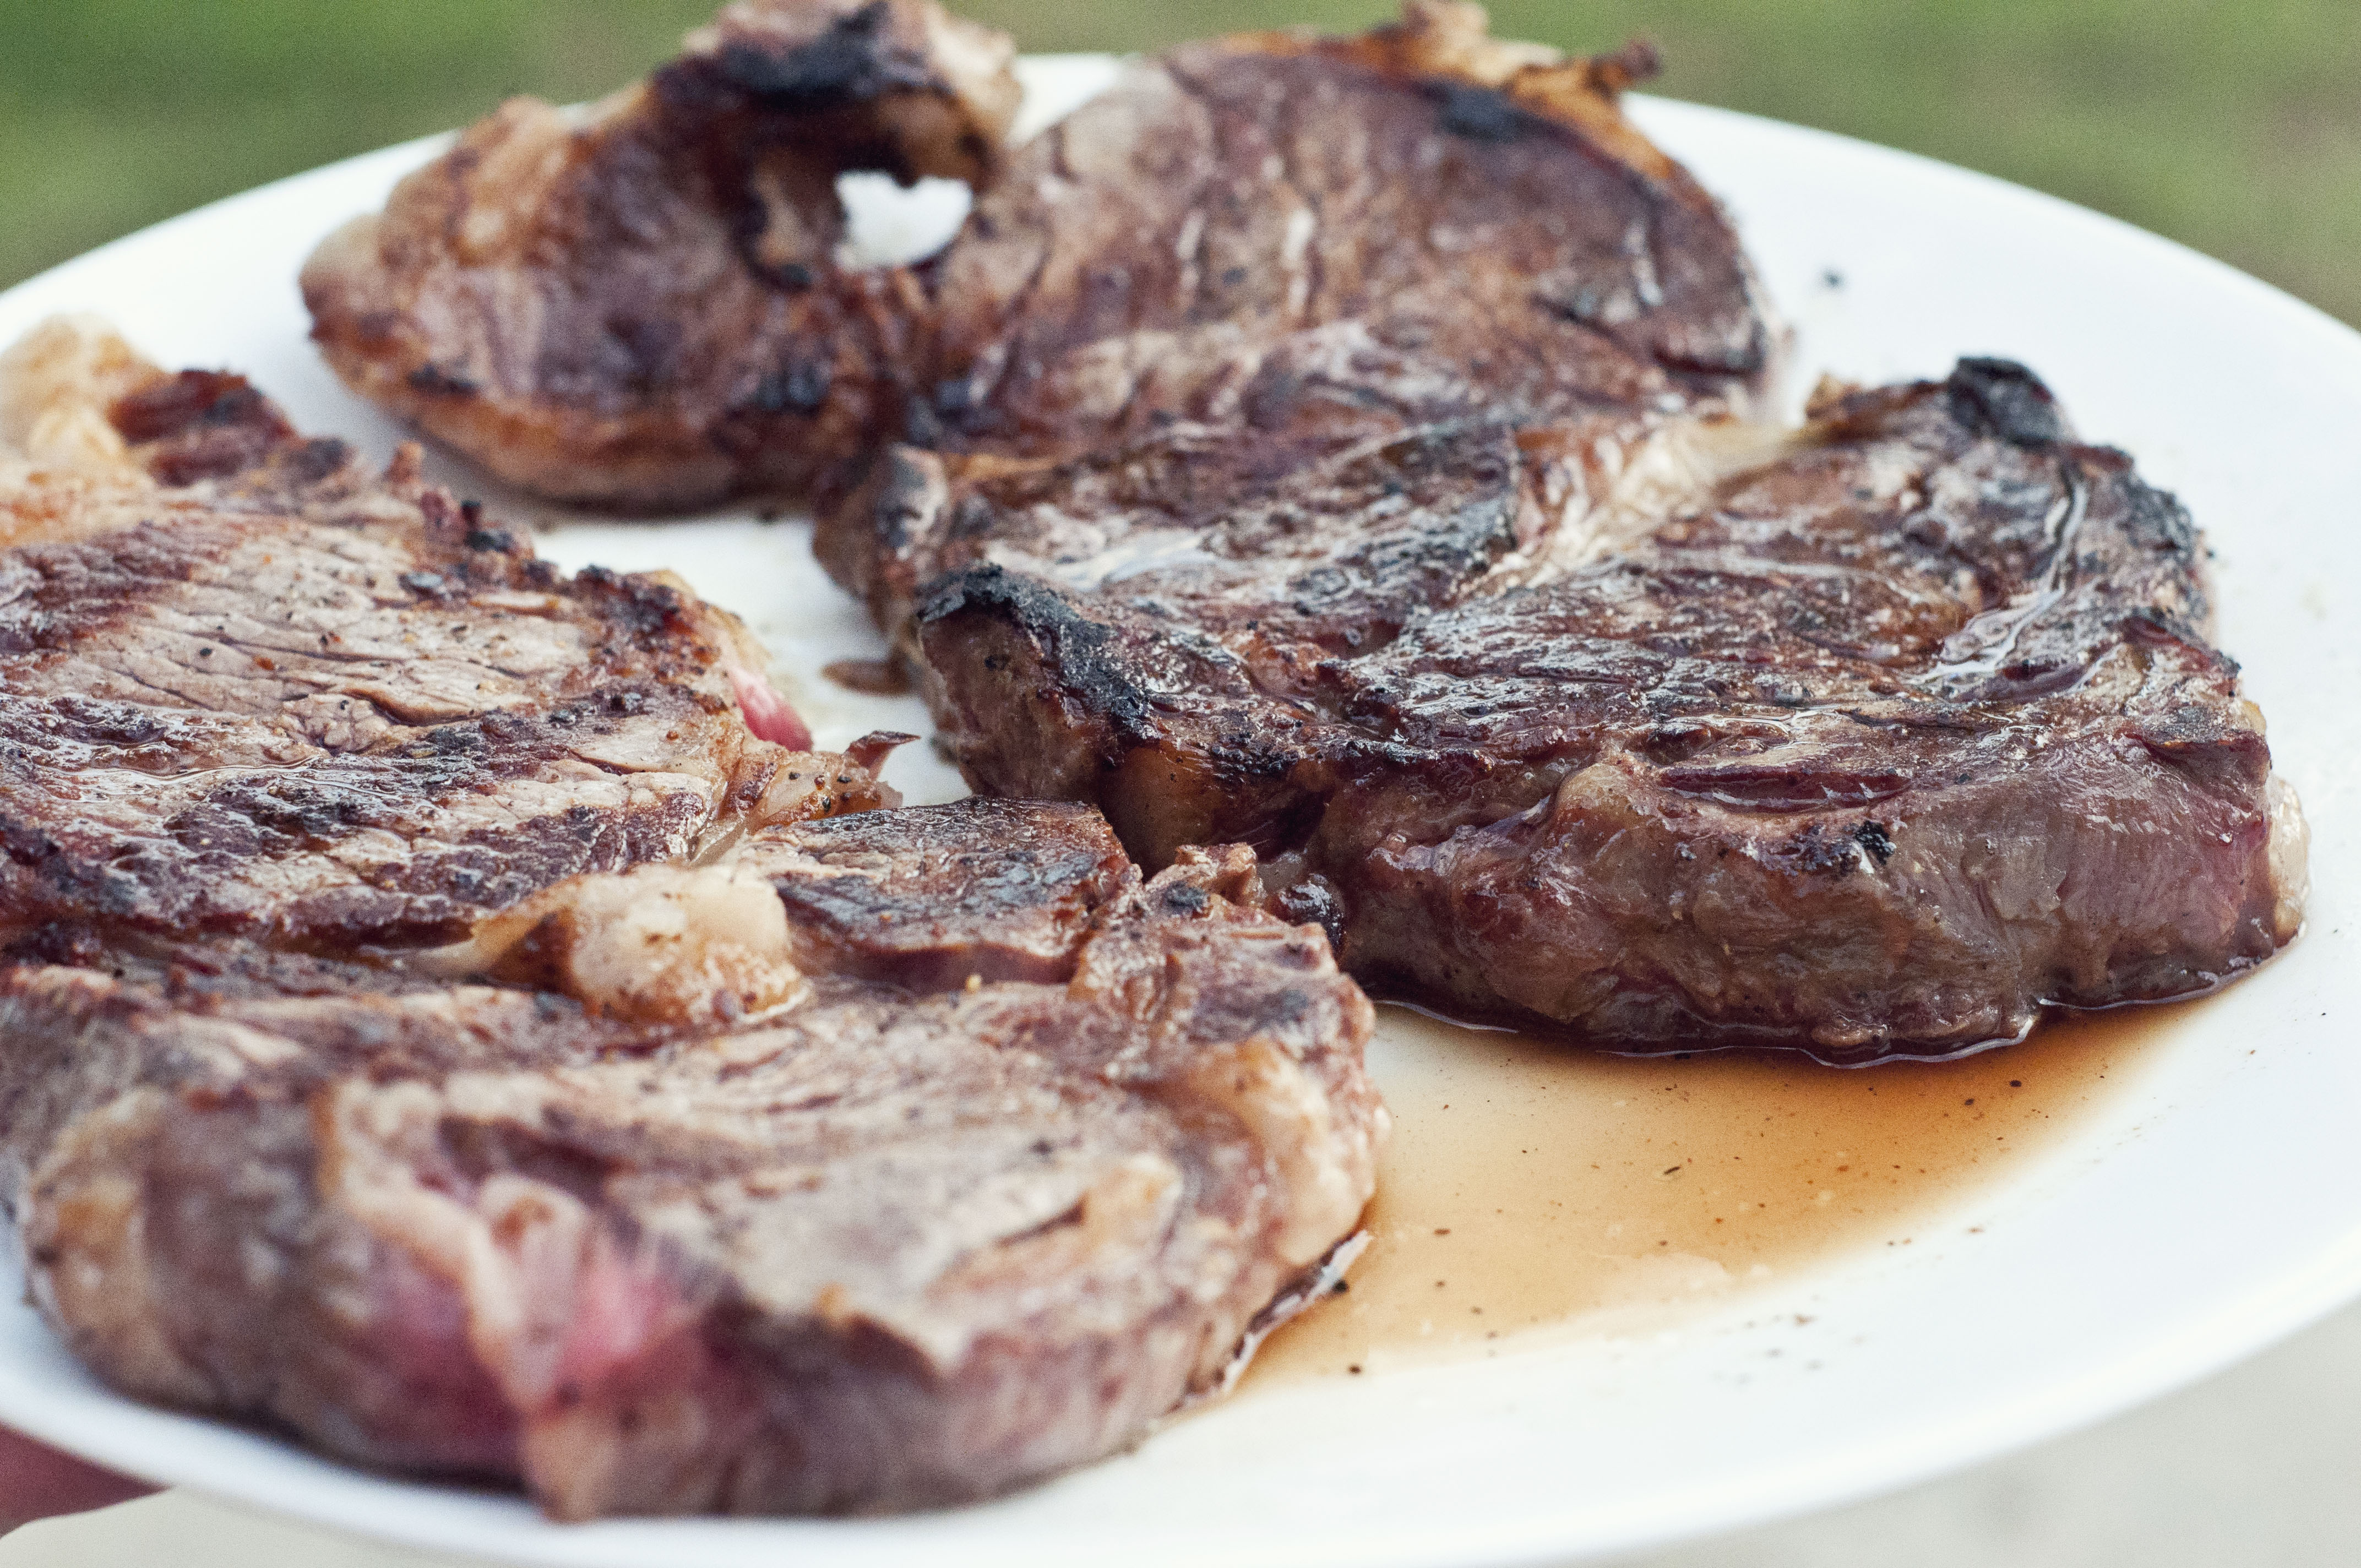 national beef month, may, beef, steak recipe, steak tip, how to tenderize steak, how to cook steak, how to make a perfect steak, beef, cooking, food, cattle, recipes